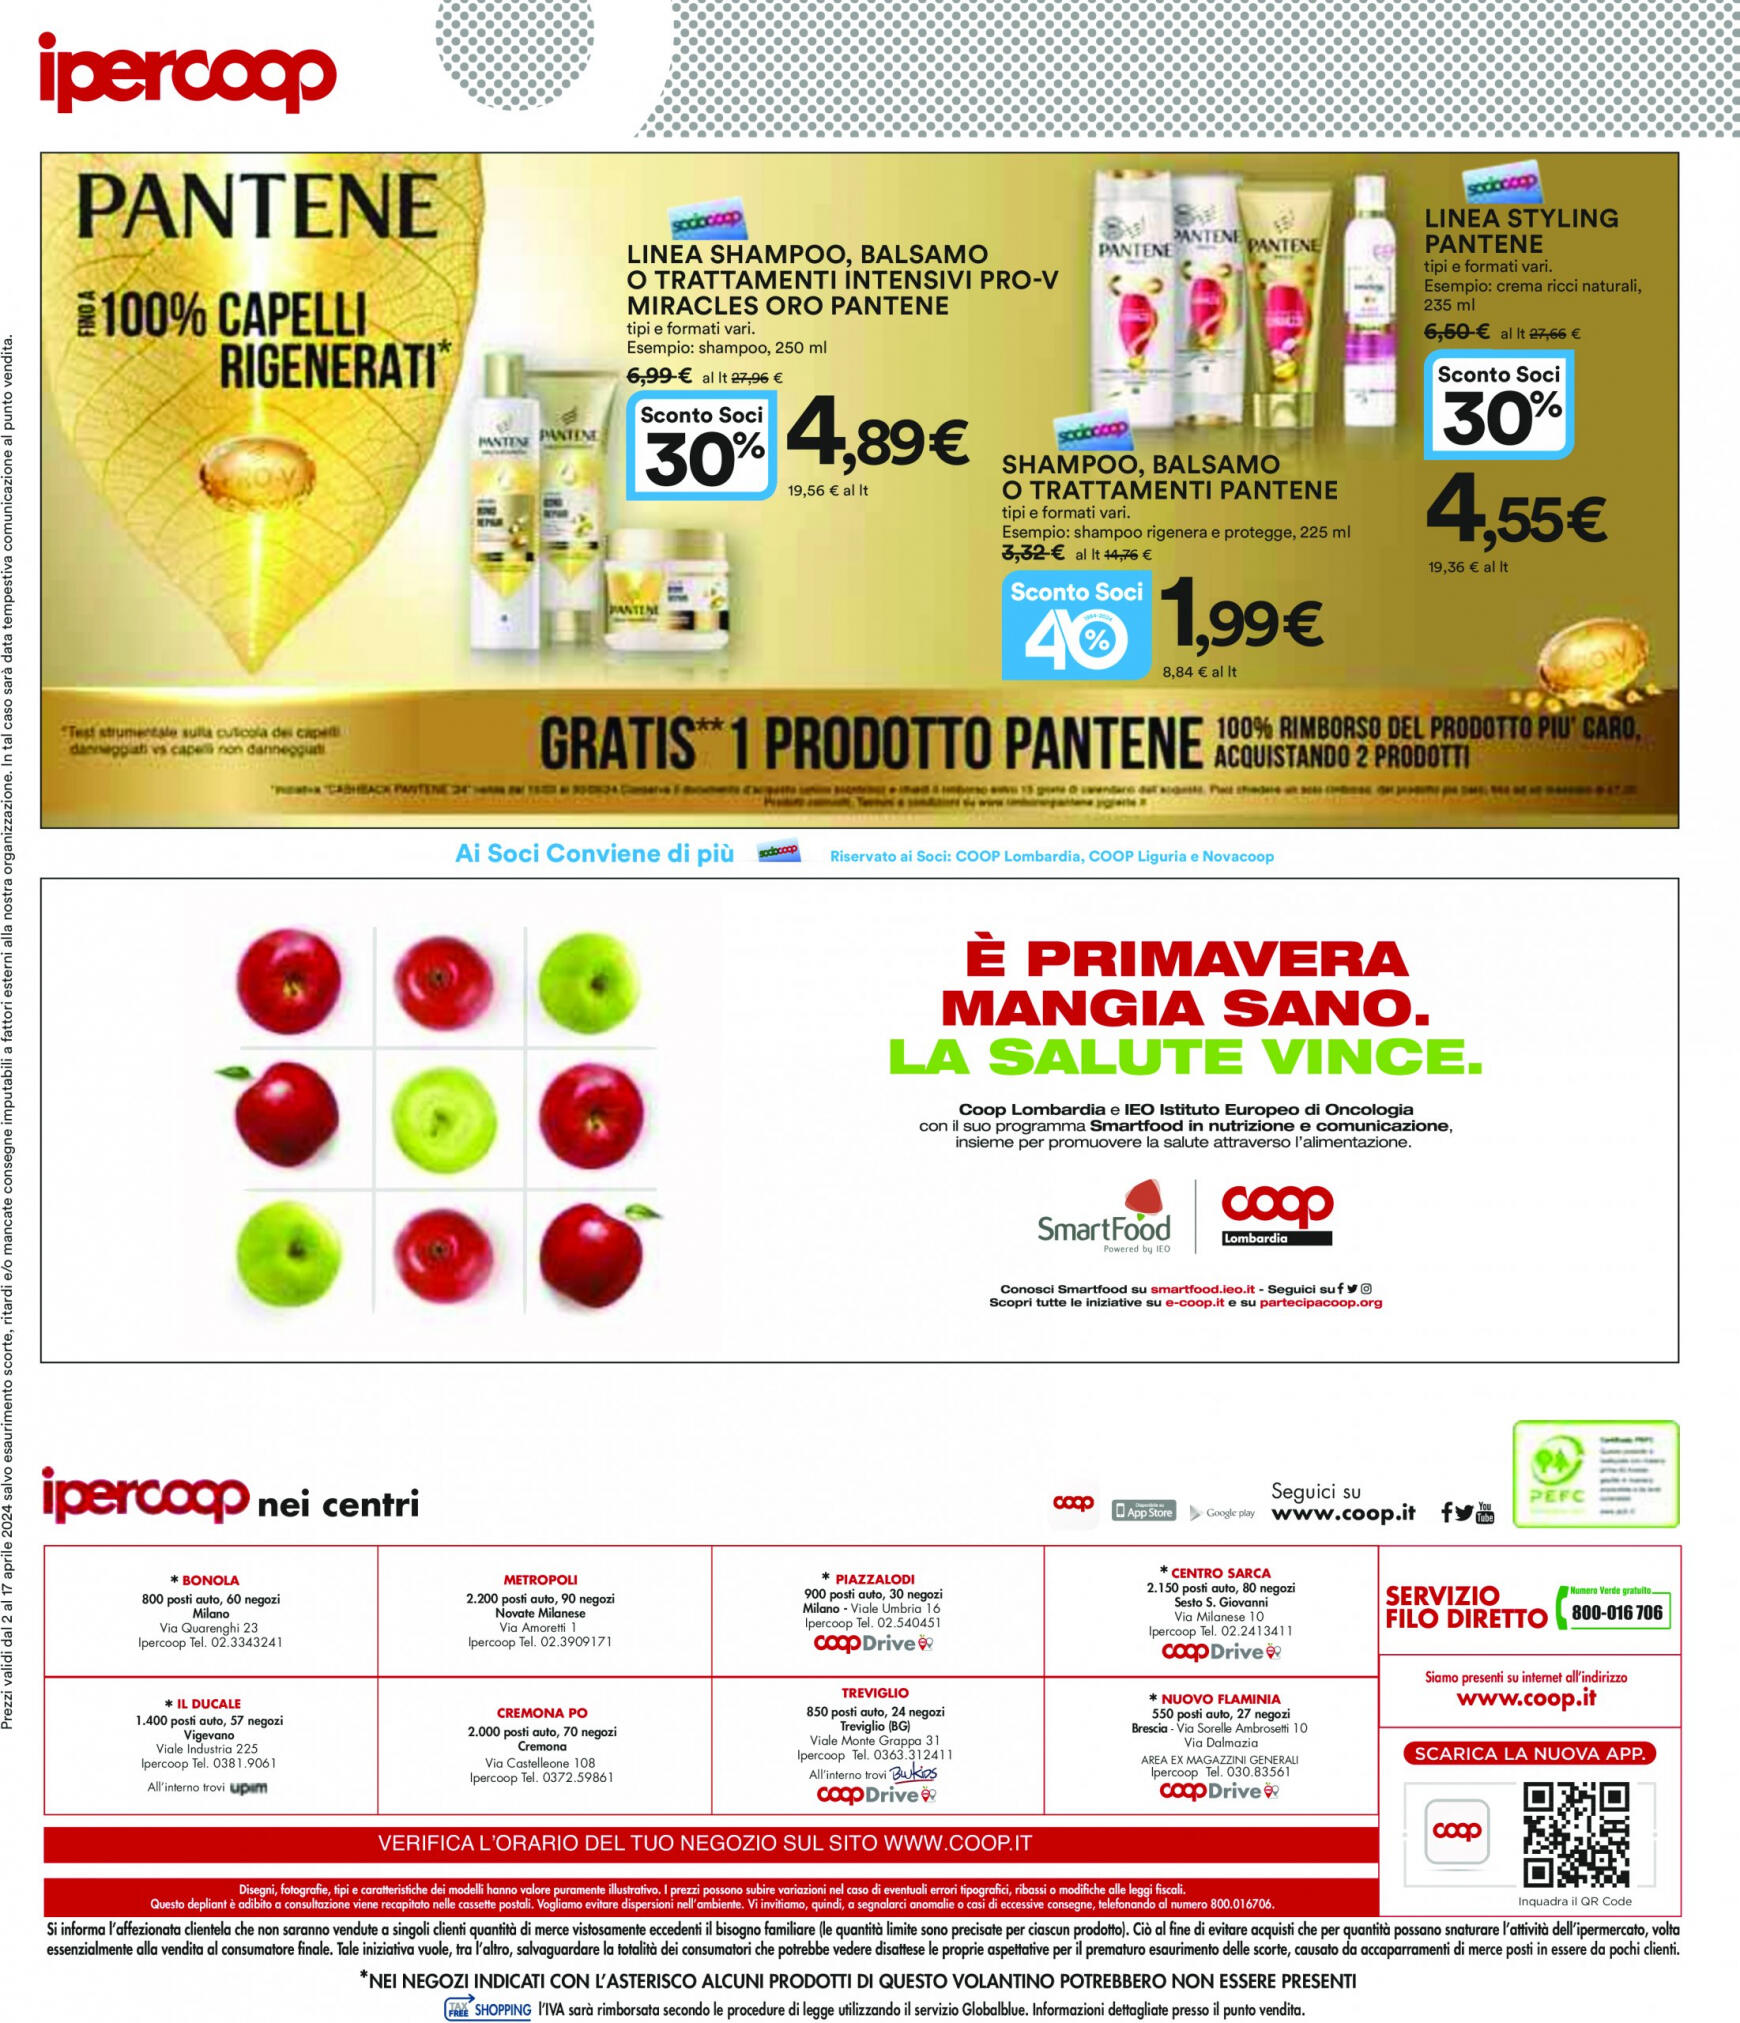 coop - Nuovo volantino Coop 02.04. - 17.04. - page: 34